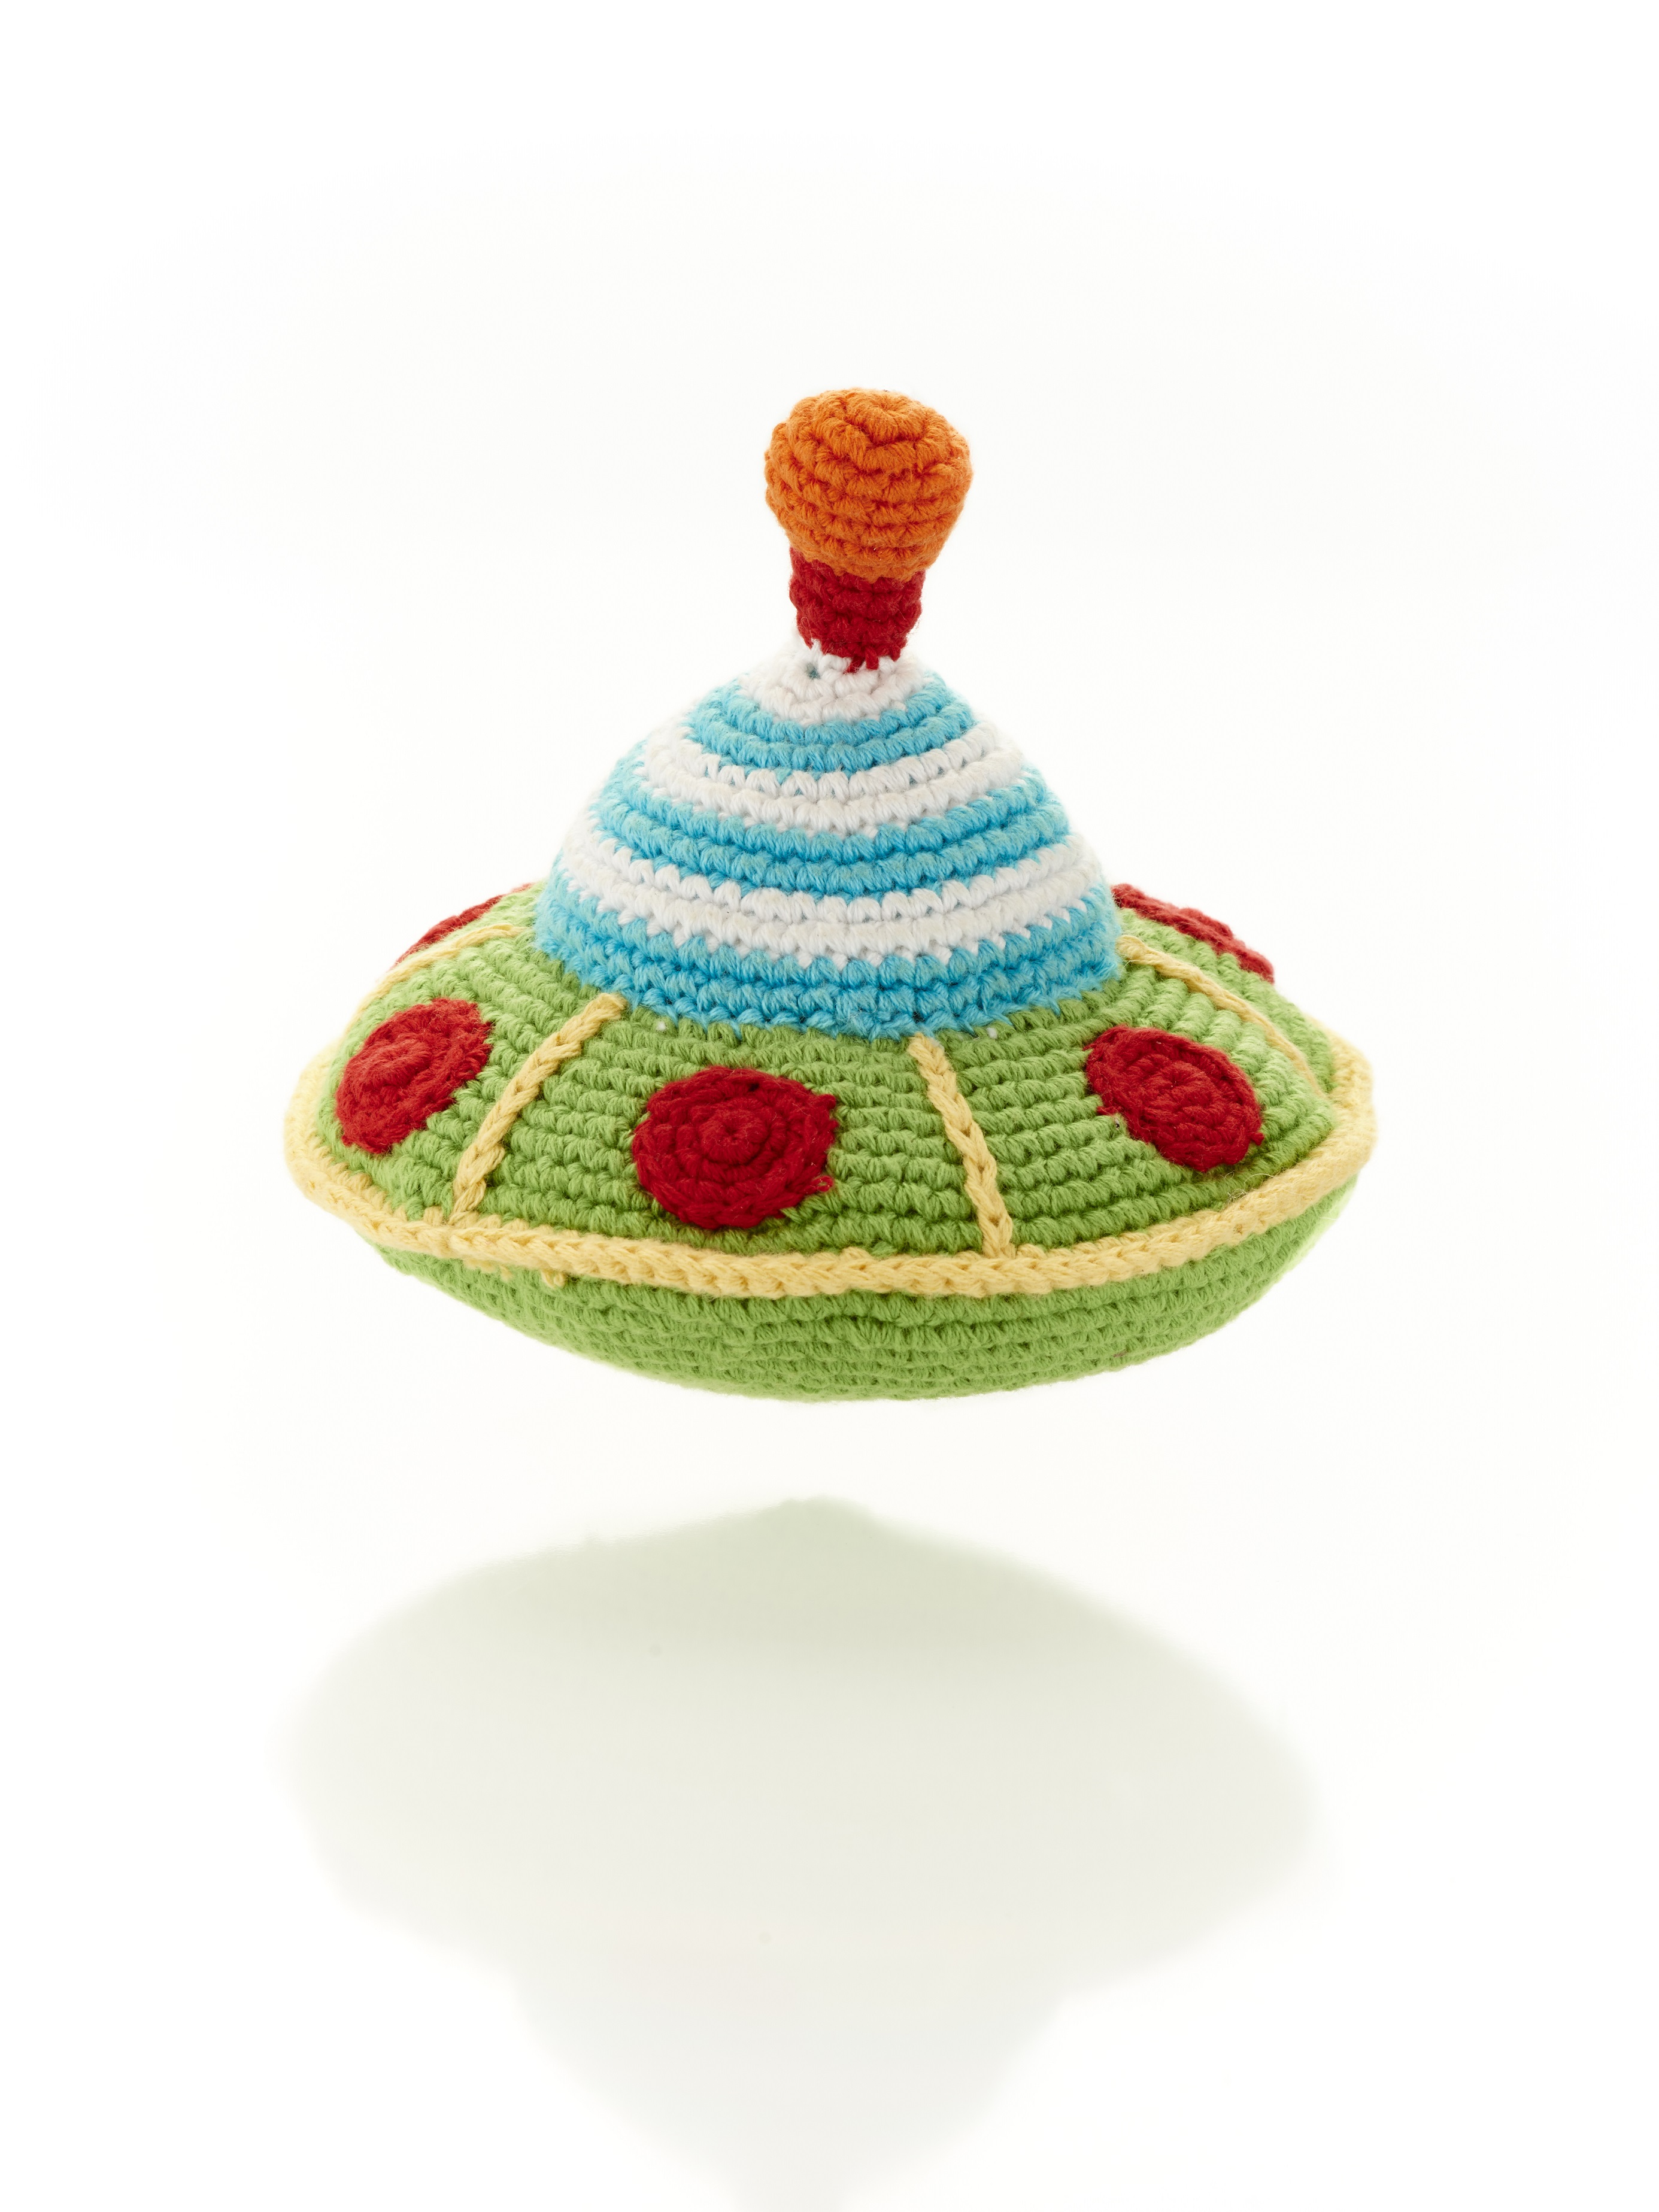 Flying saucer rattle